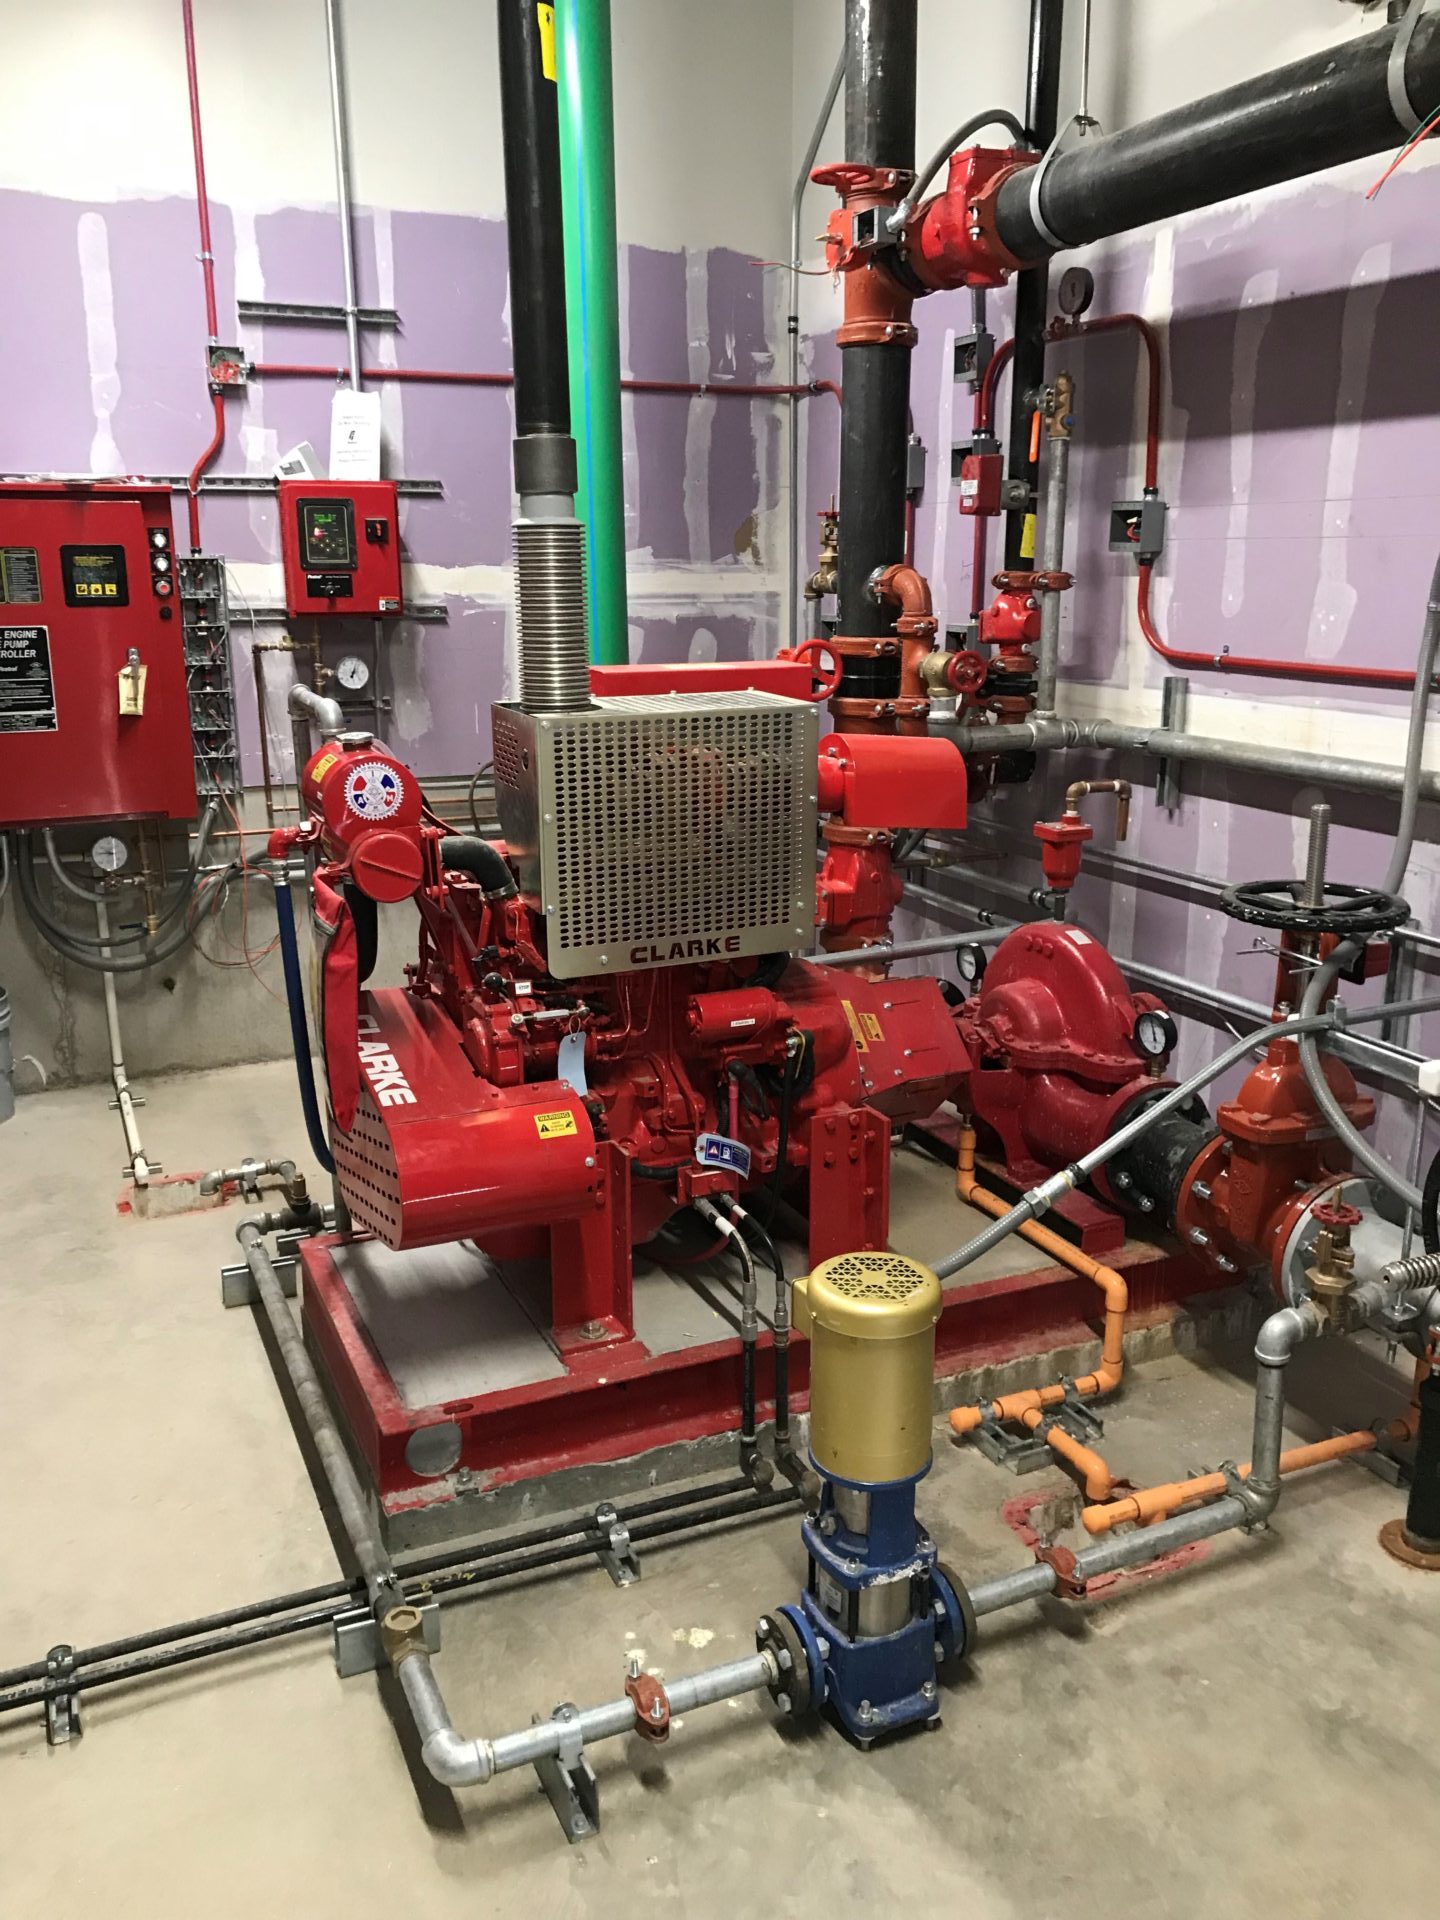 UA Pump Room: Fire Protection by Complete Fire Protection AZ